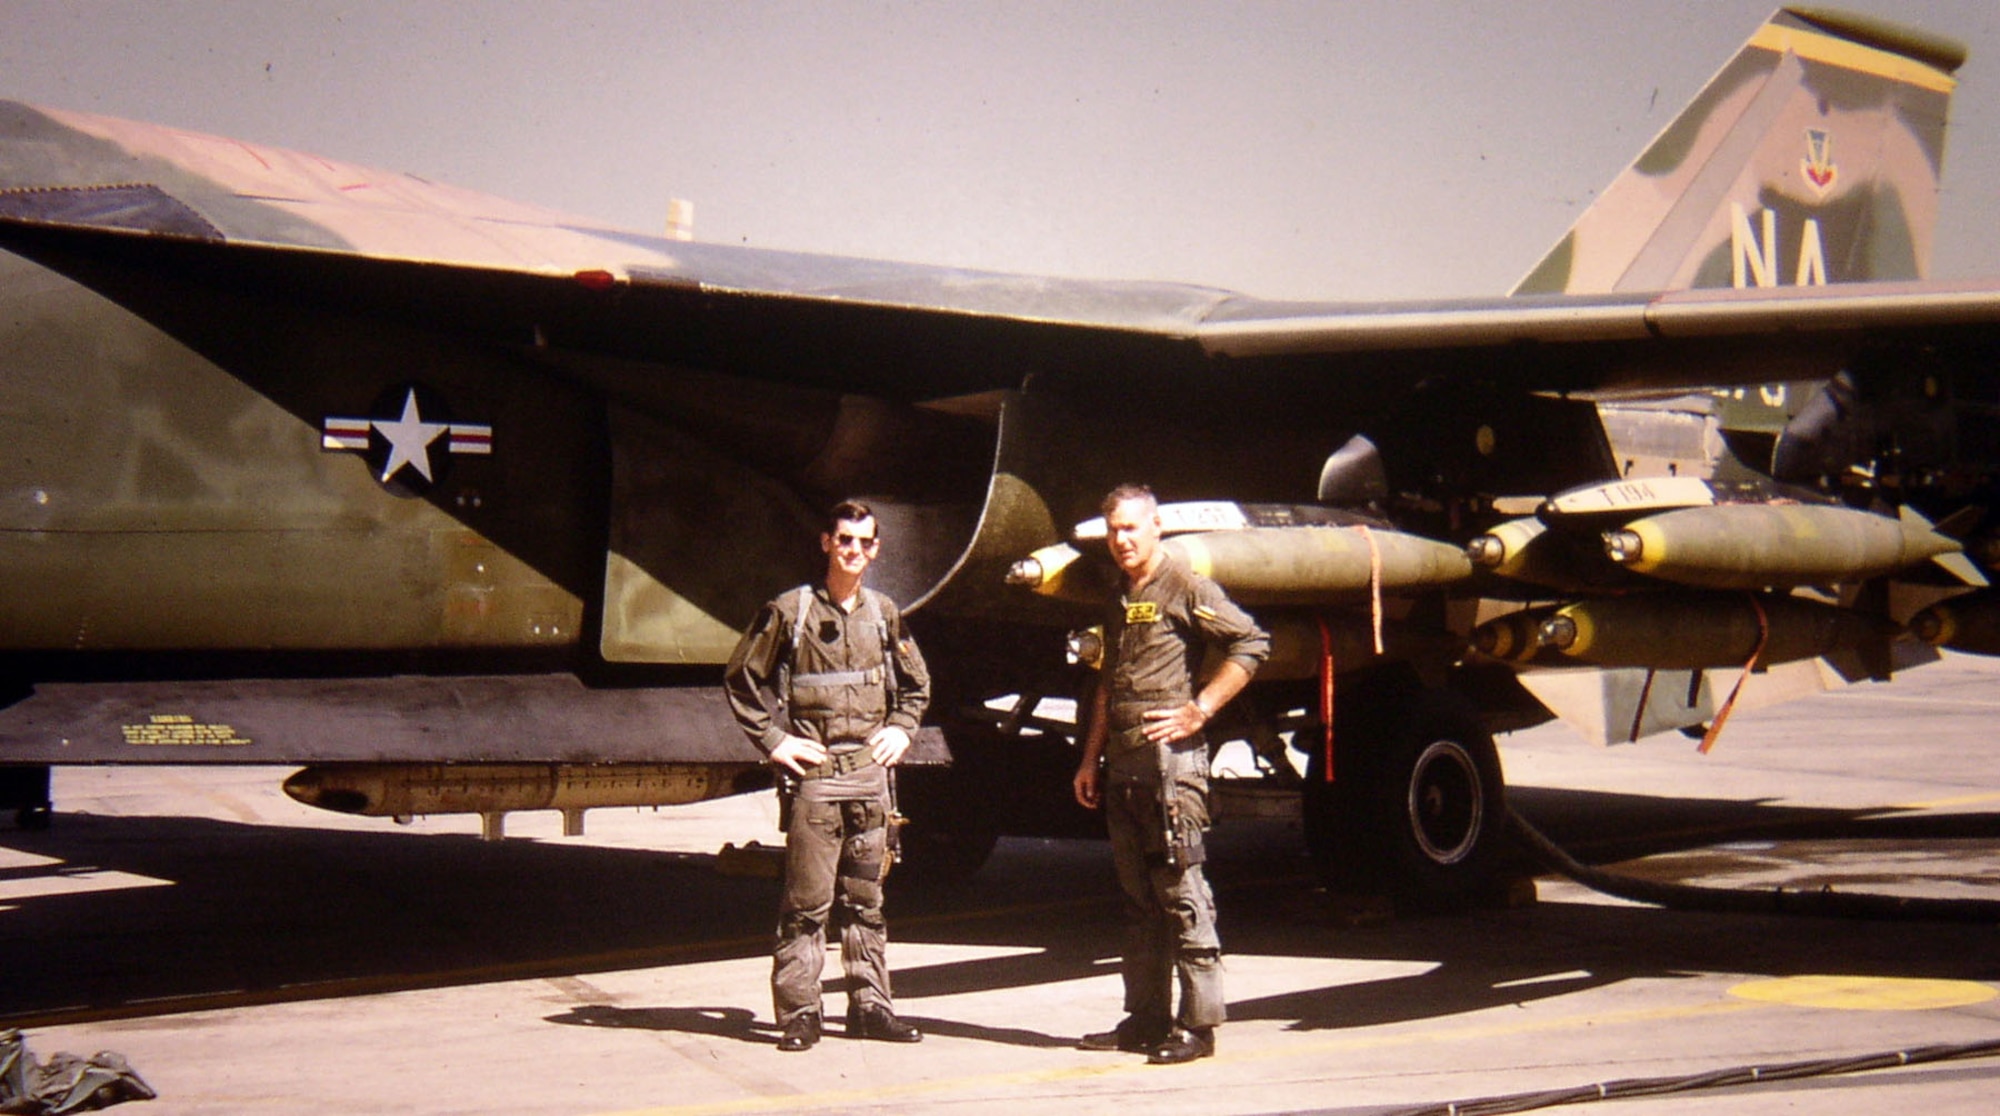 A 474th Tactical Fighter Wing F-111A aircrew stands in front of their aircraft before a mission. In September 1972, the 474th TFW deployed 48 F-111As to Thailand. (U.S. Air Force photo)